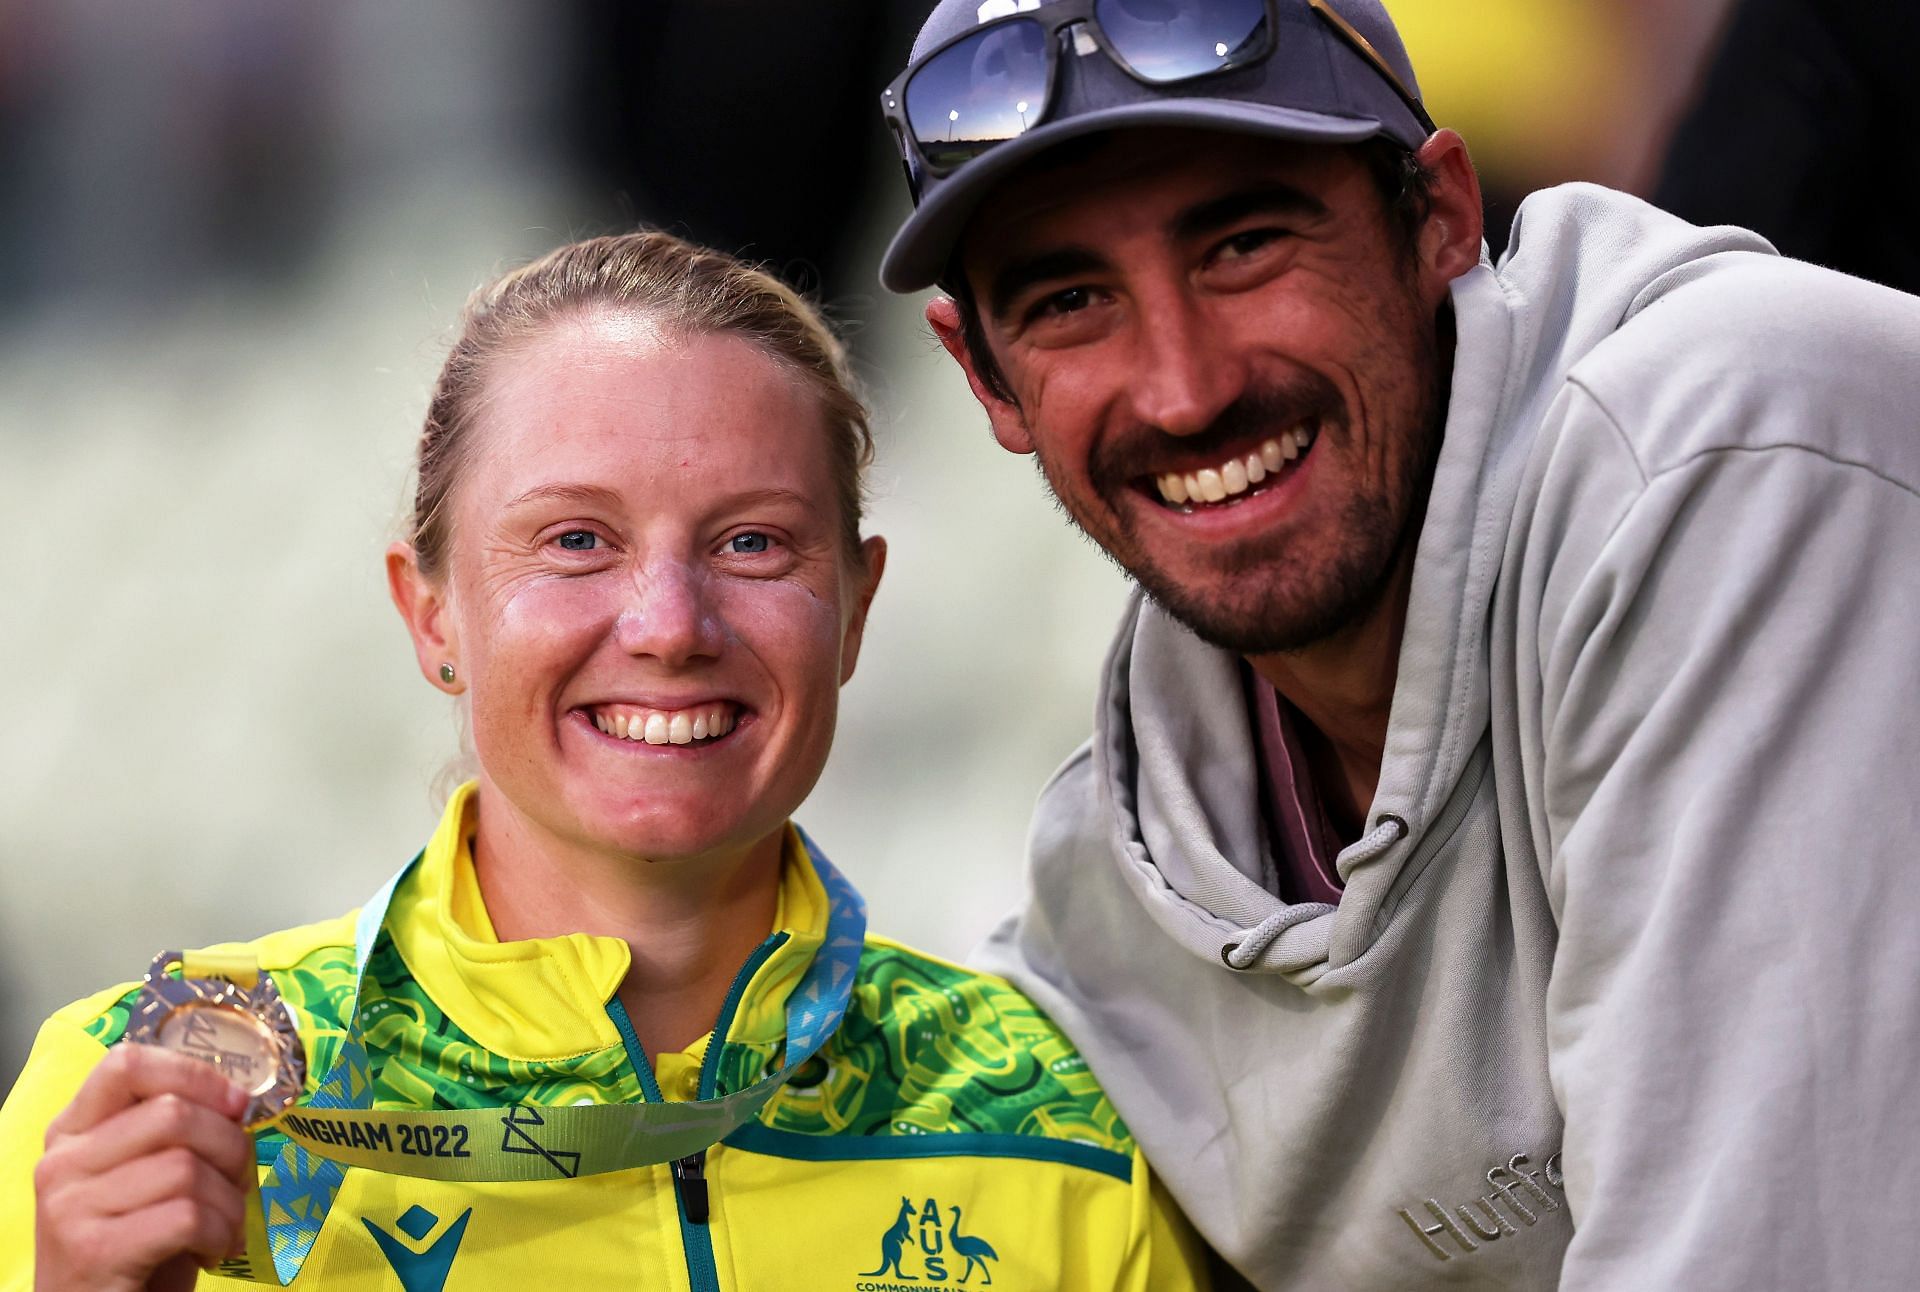 Mitchell Starc also attended the Commonwealth Games Women's Cricket Final (Image: Getty)